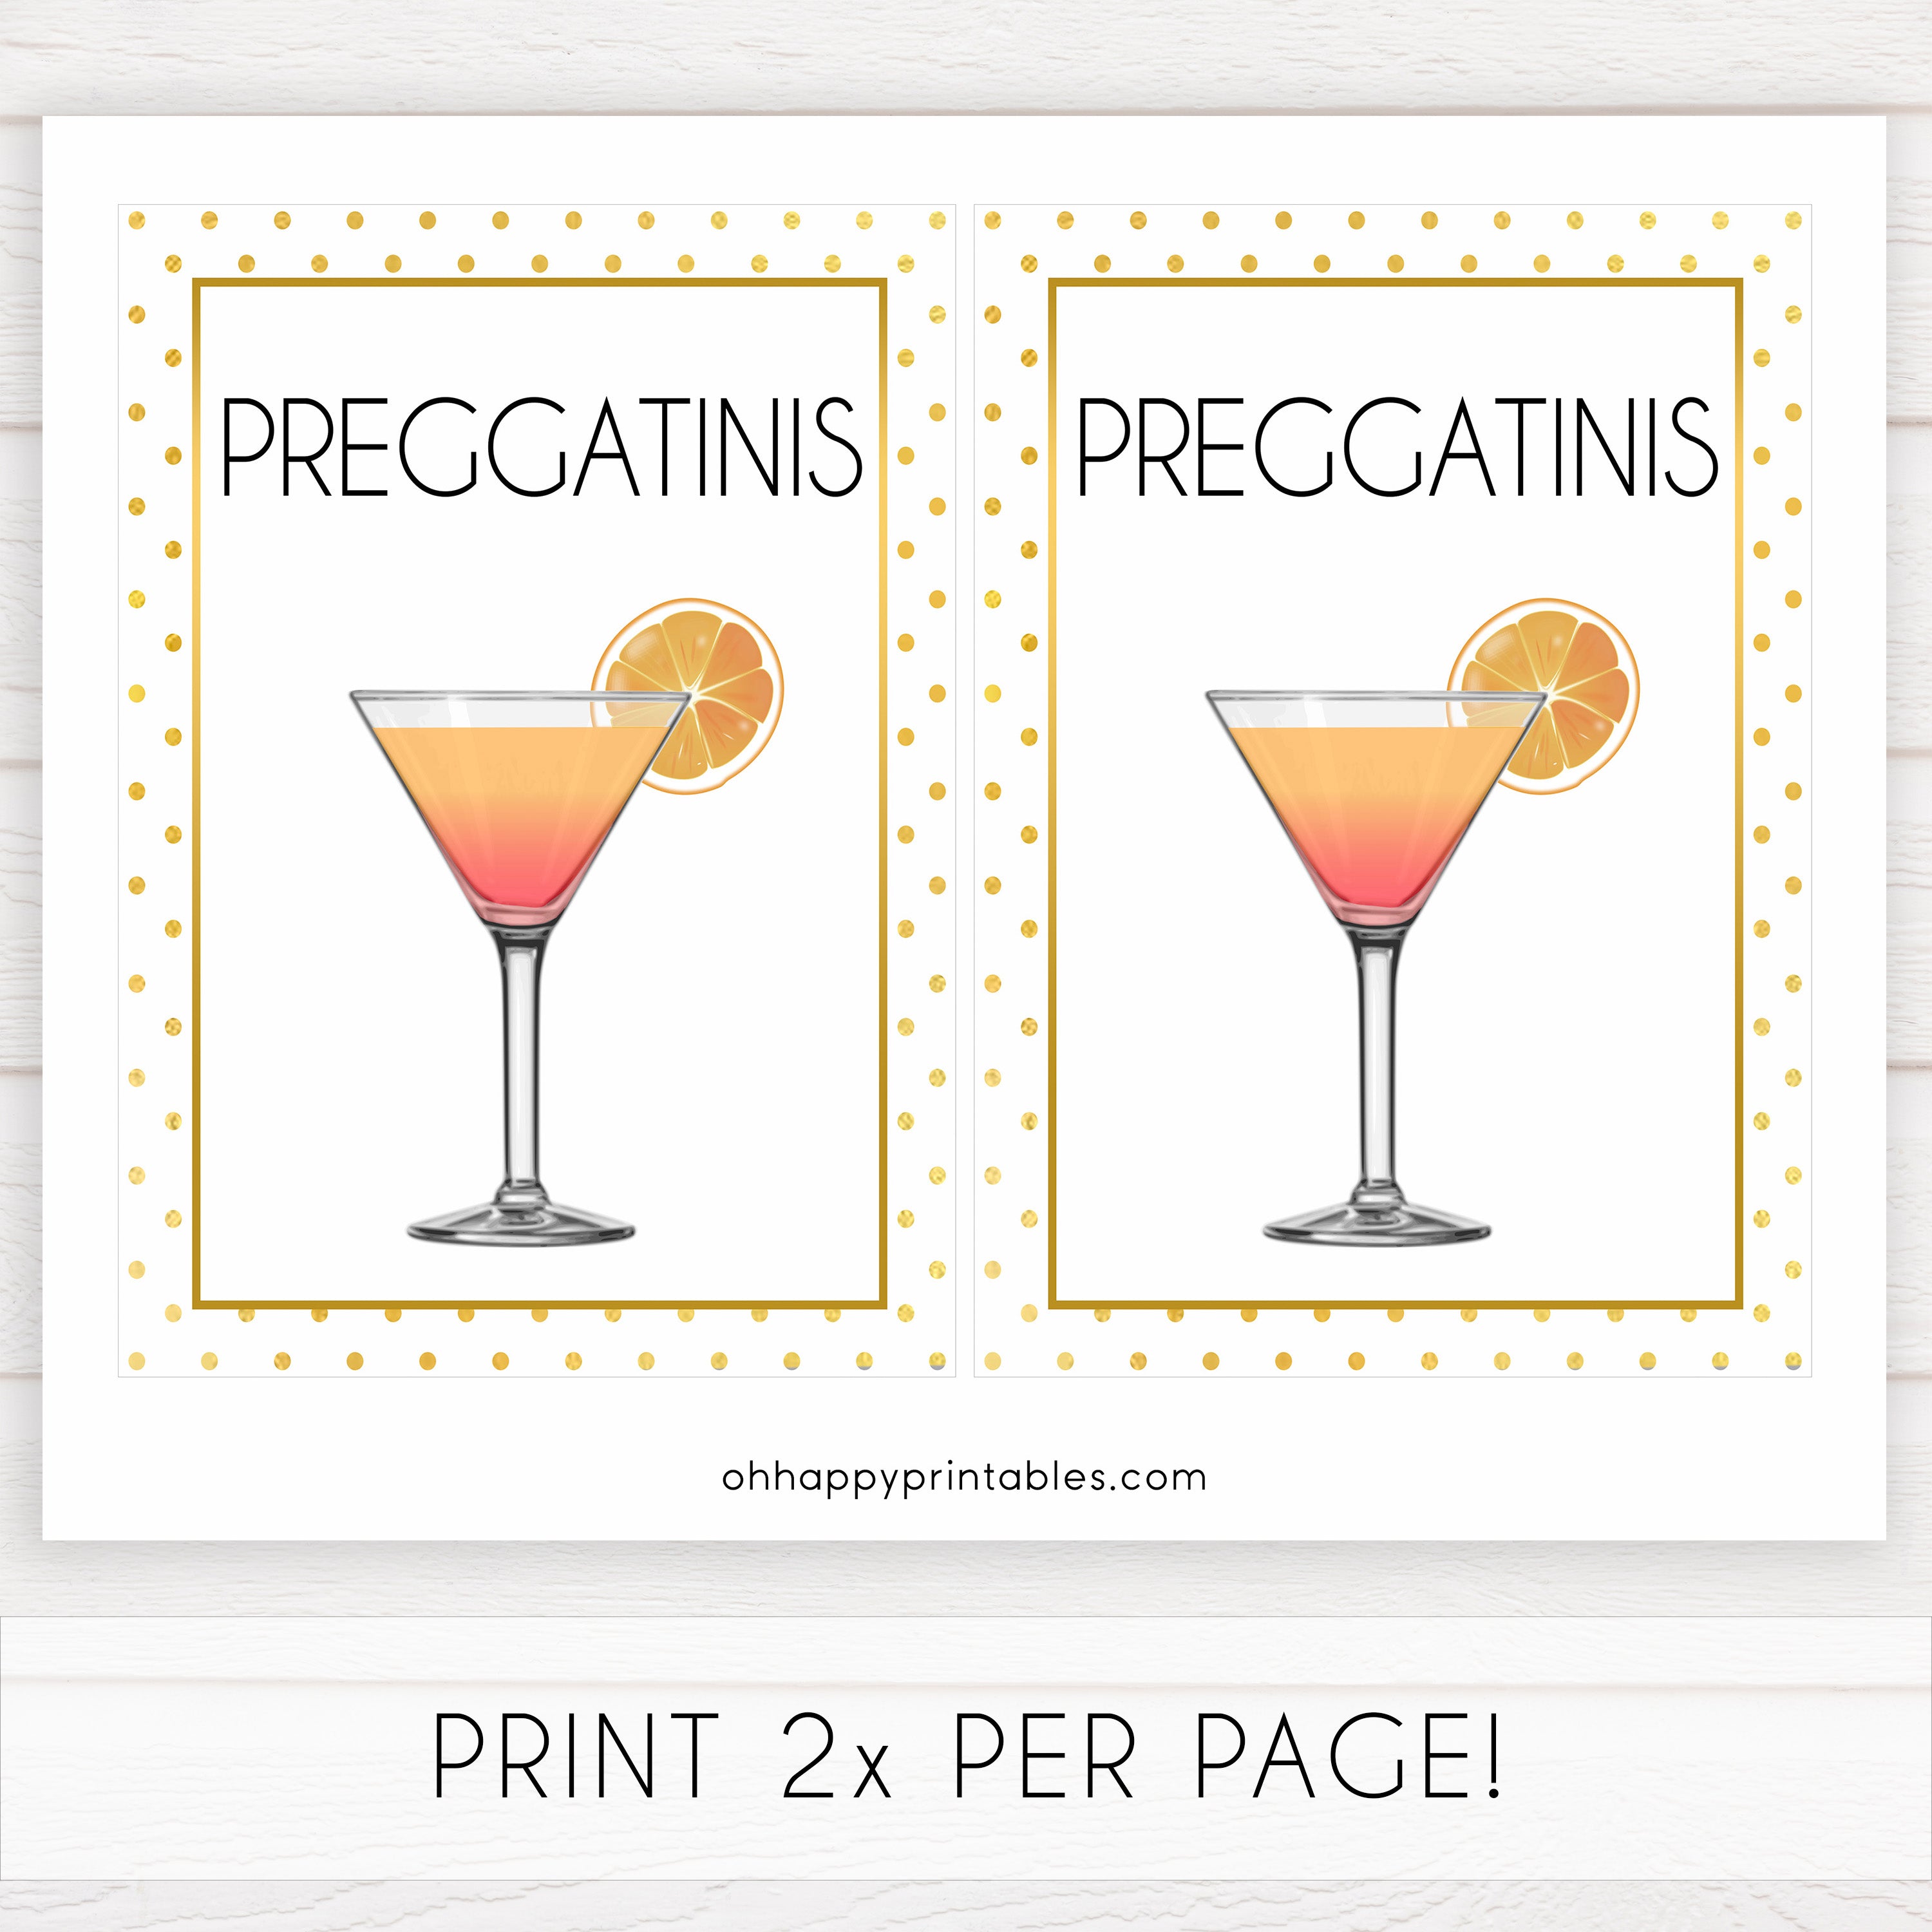 preaggatinis baby table signs, Baby gold dots baby decor, printable baby table signs, printable baby decor, baby gold glitter table signs, fun baby signs, baby gold fun baby table signs